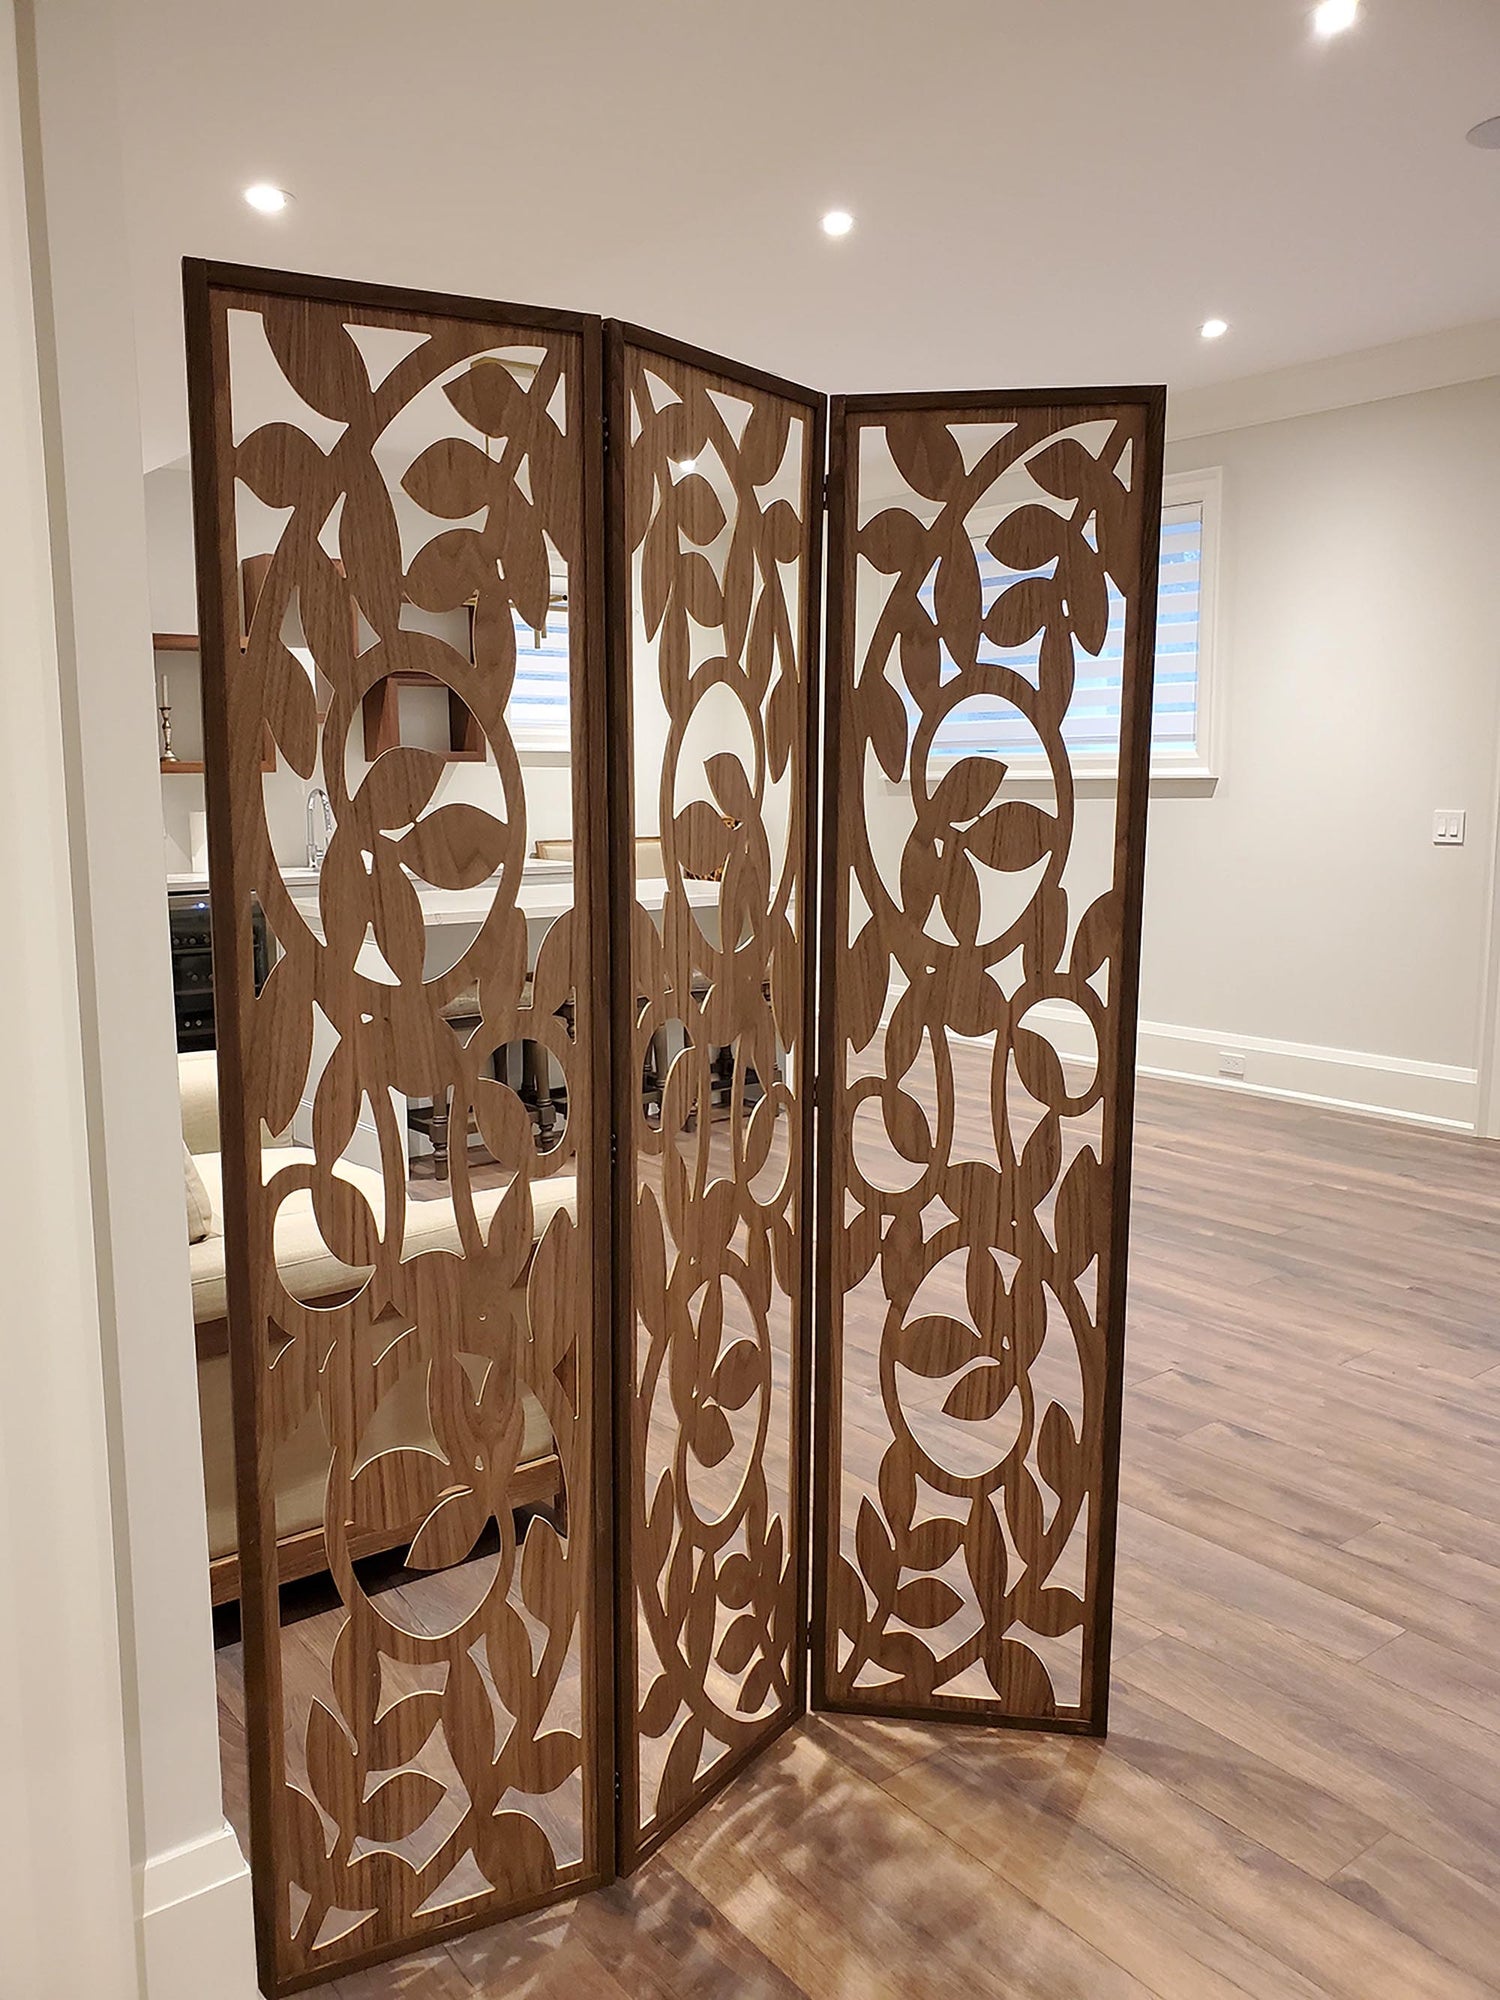 Room dividers, room dividing, dividers for room, walls with wood panels, panel wood, room dividers ideas, dividing room ideas, ideas on how to divide a room, ideas for dividing rooms, ideas for dividing a room, divide a room ideas